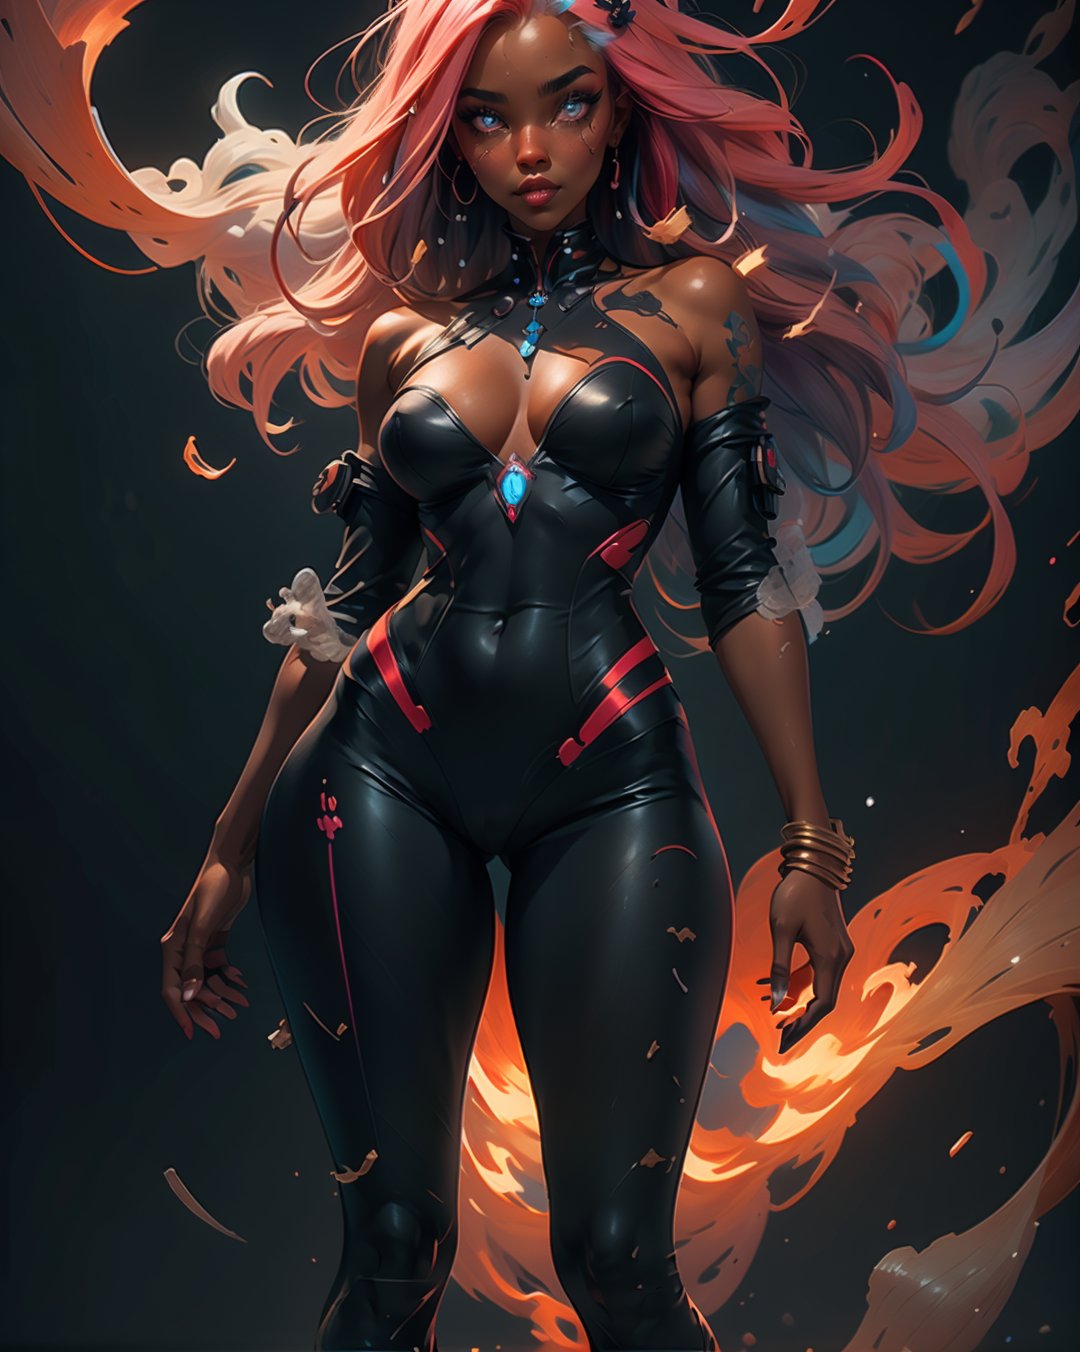 1 girl, full body, symmetrical face, perfect eyes, smoke, long poison red neon hair, dark skin, mix of sci-fi and realism, ultra high resolution, 8k, HDr, art, high detail , ,fantchar,cloud